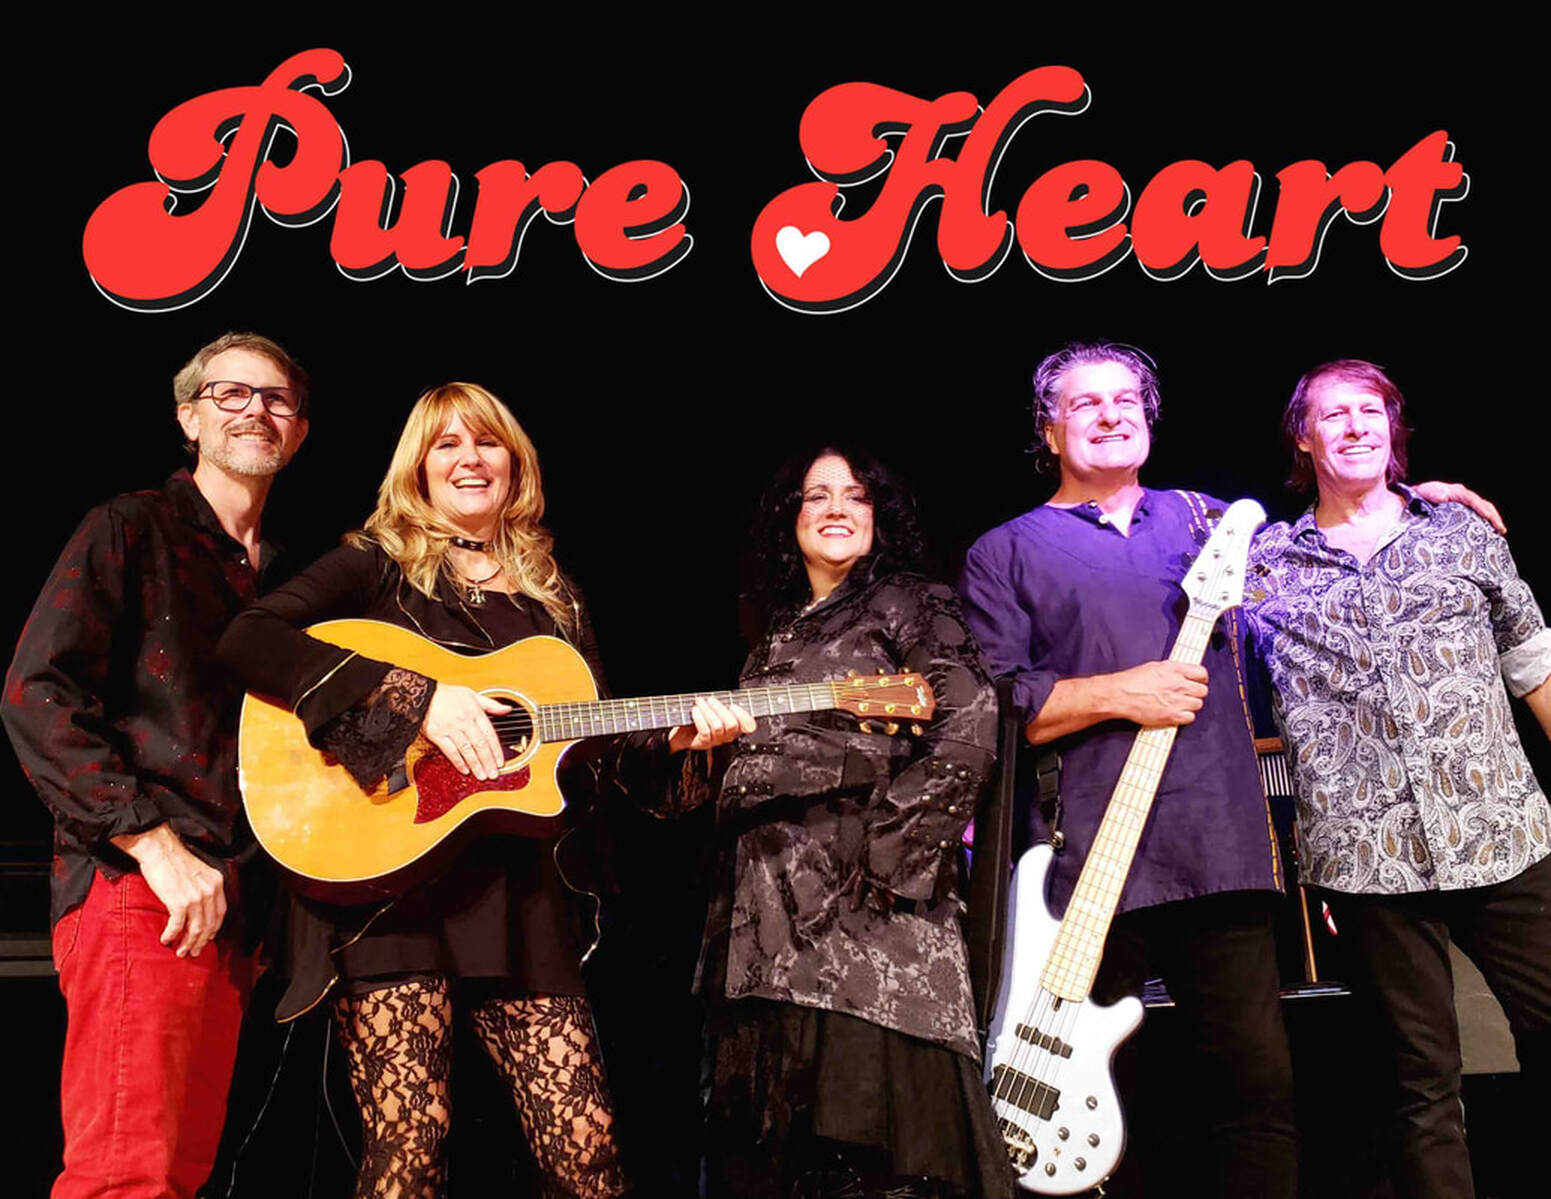 Pure Heart band tribute to Heart